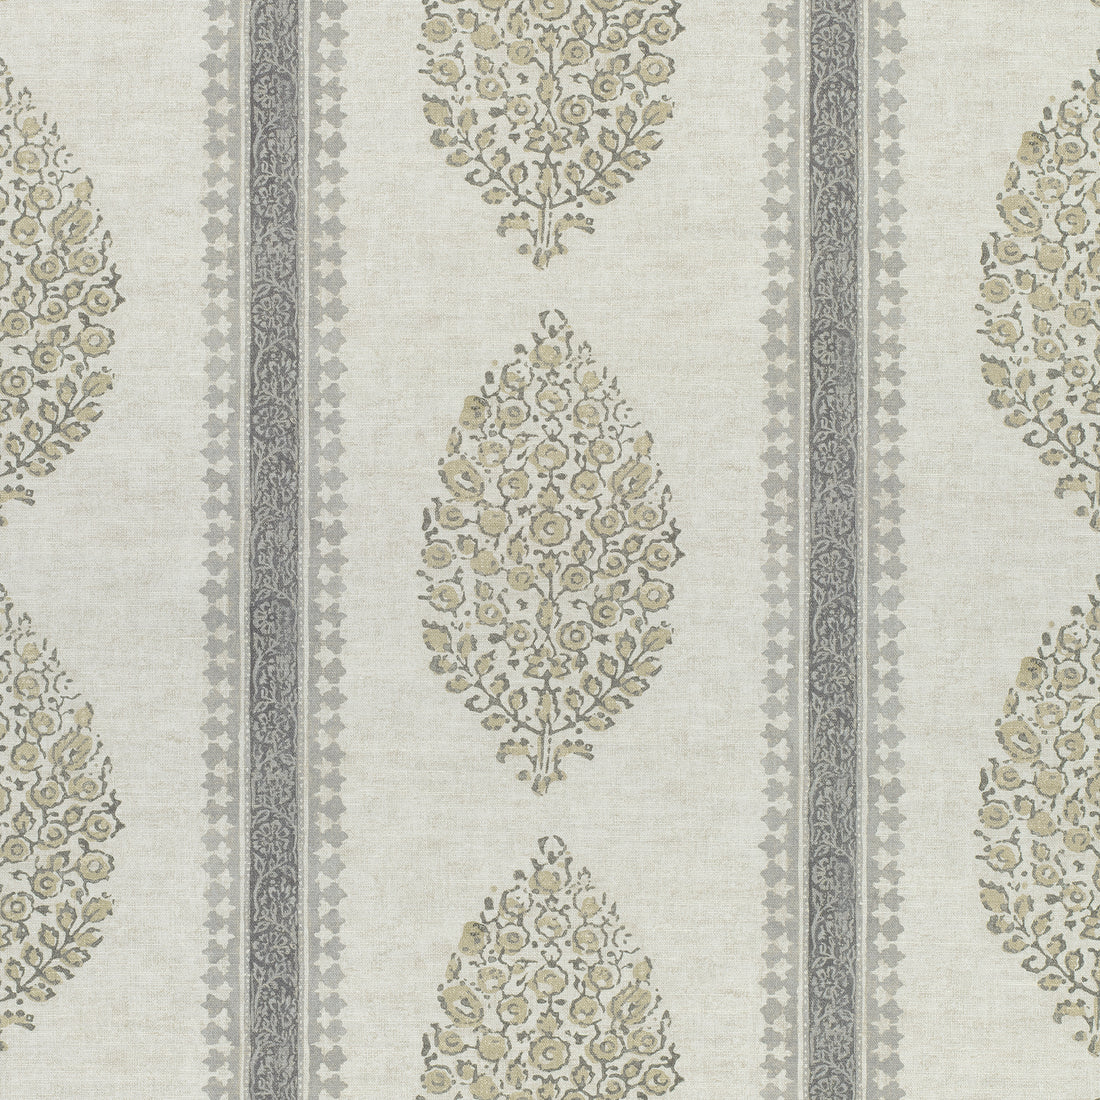 Chappana fabric in grey color - pattern number F910236 - by Thibaut in the Colony collection